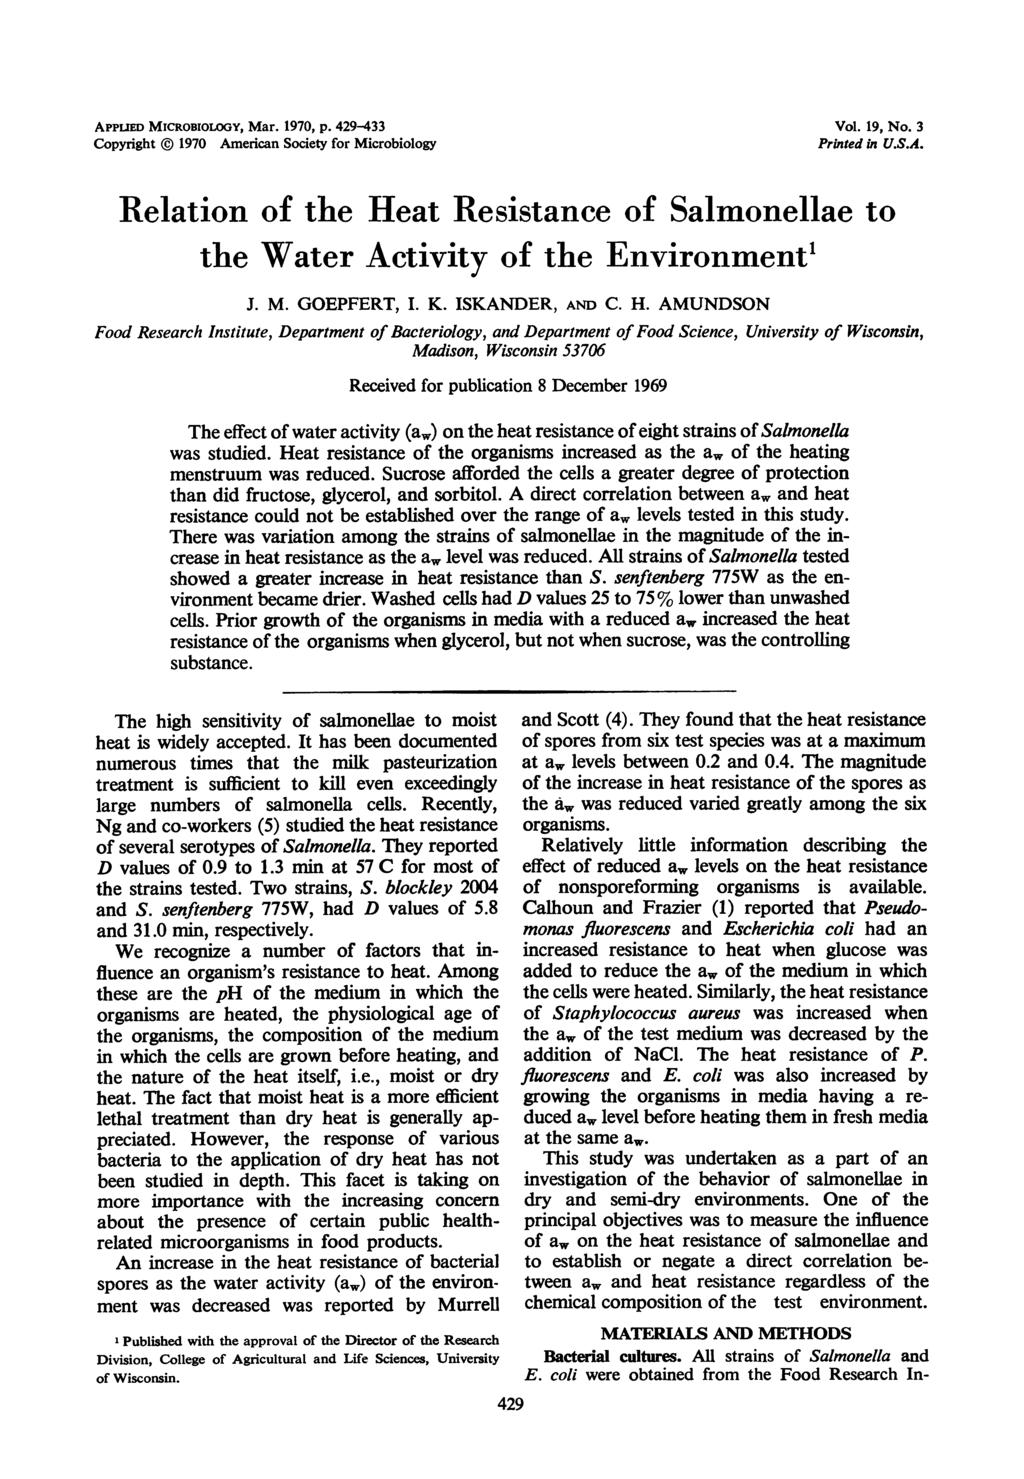 APPLED MICROBIOLOGY, Mar. 1970, p. 9- Copyright 1970 American Society for Microbiology Vol. 19, No. Printed in U.S.A. Relation of the Heat Resistance of Salmonellae to the Water Activity of the Environment1 J.